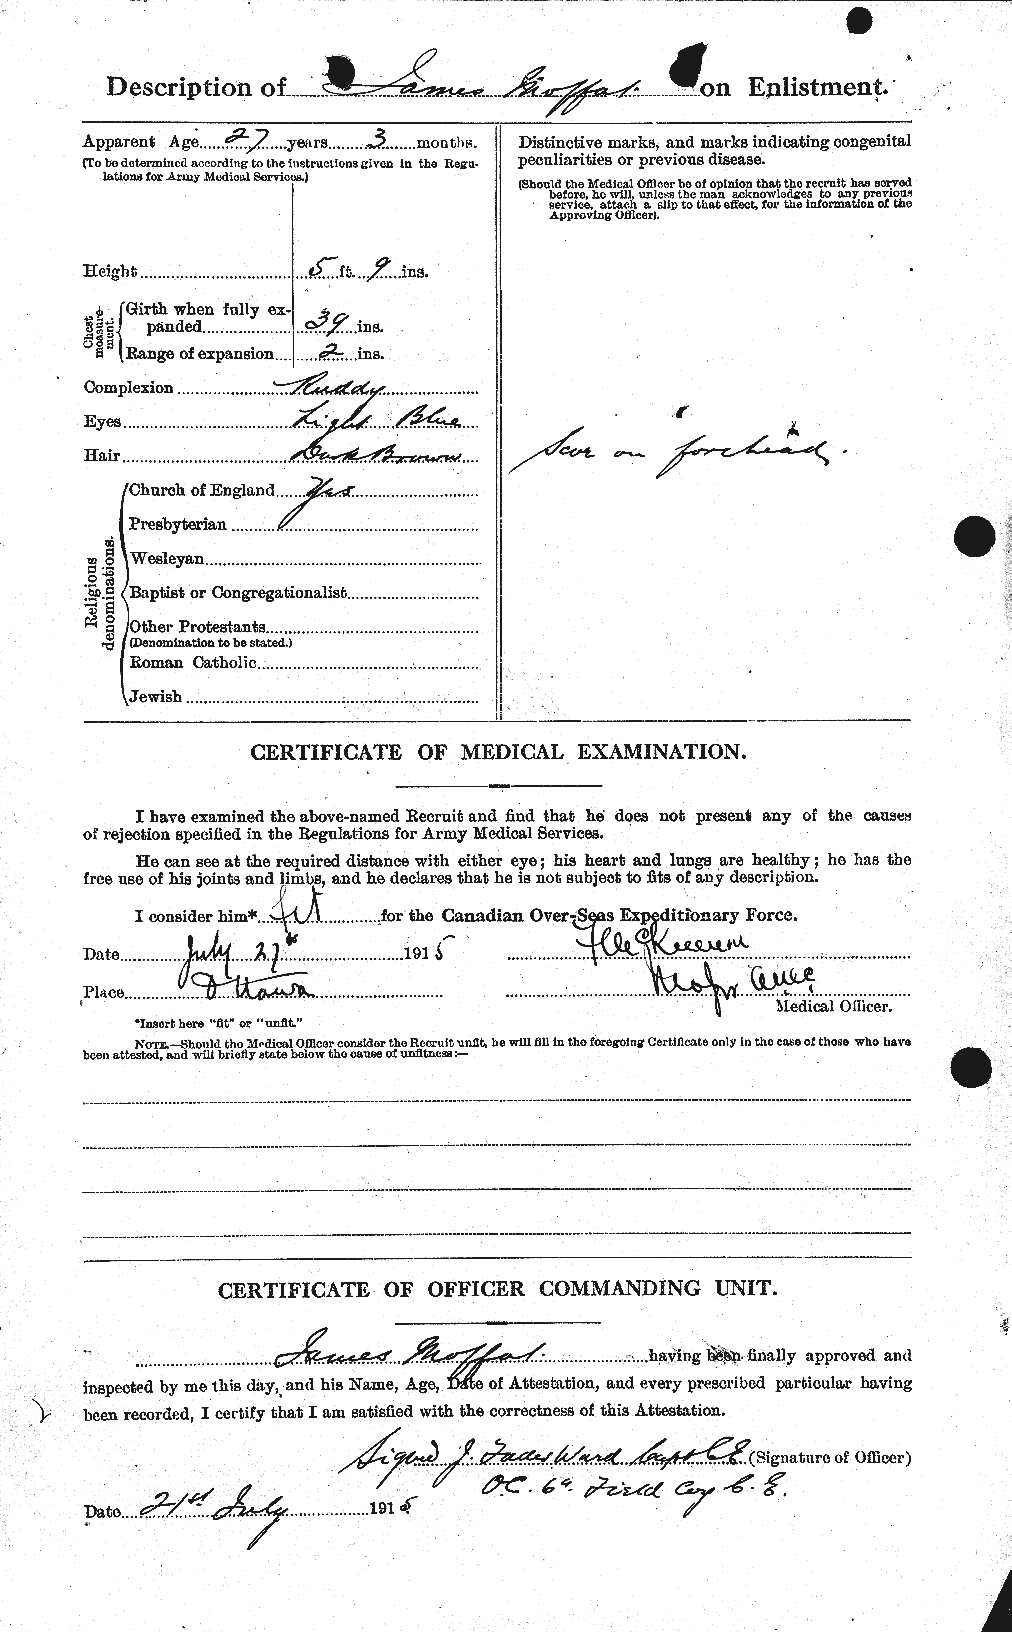 Personnel Records of the First World War - CEF 499027b